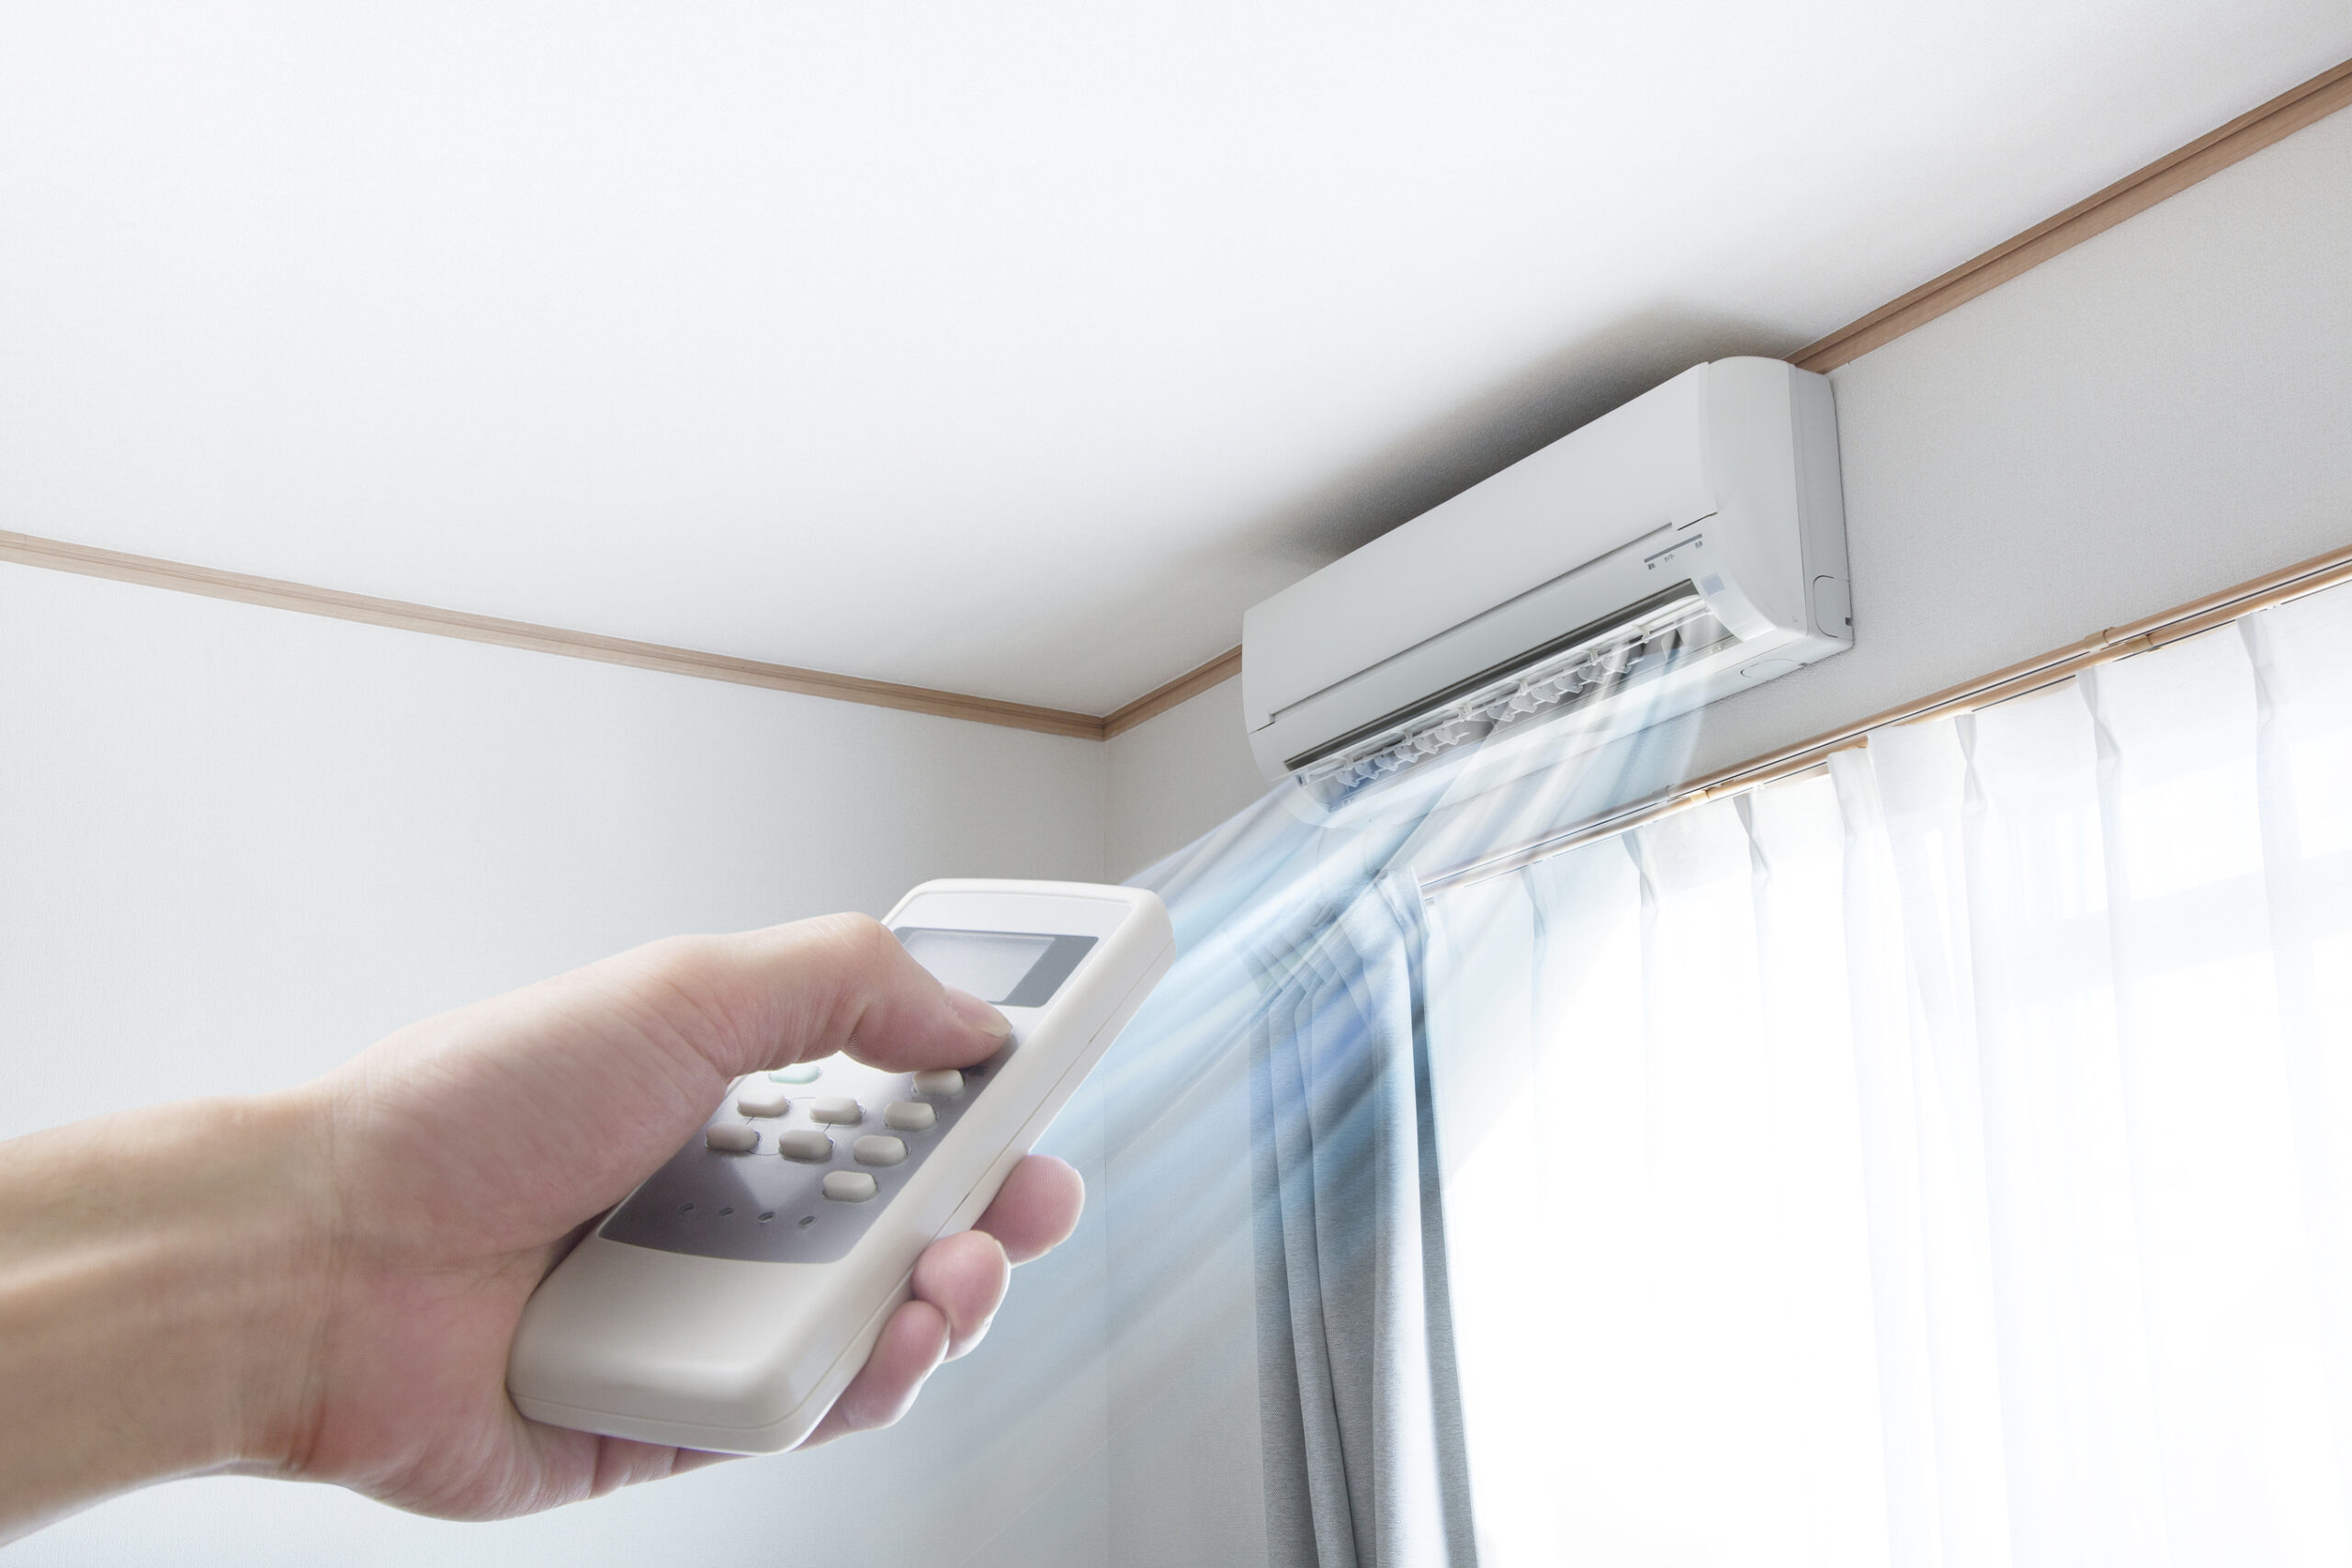 Woman's hand pointing remote at ductless mini-split blowing air